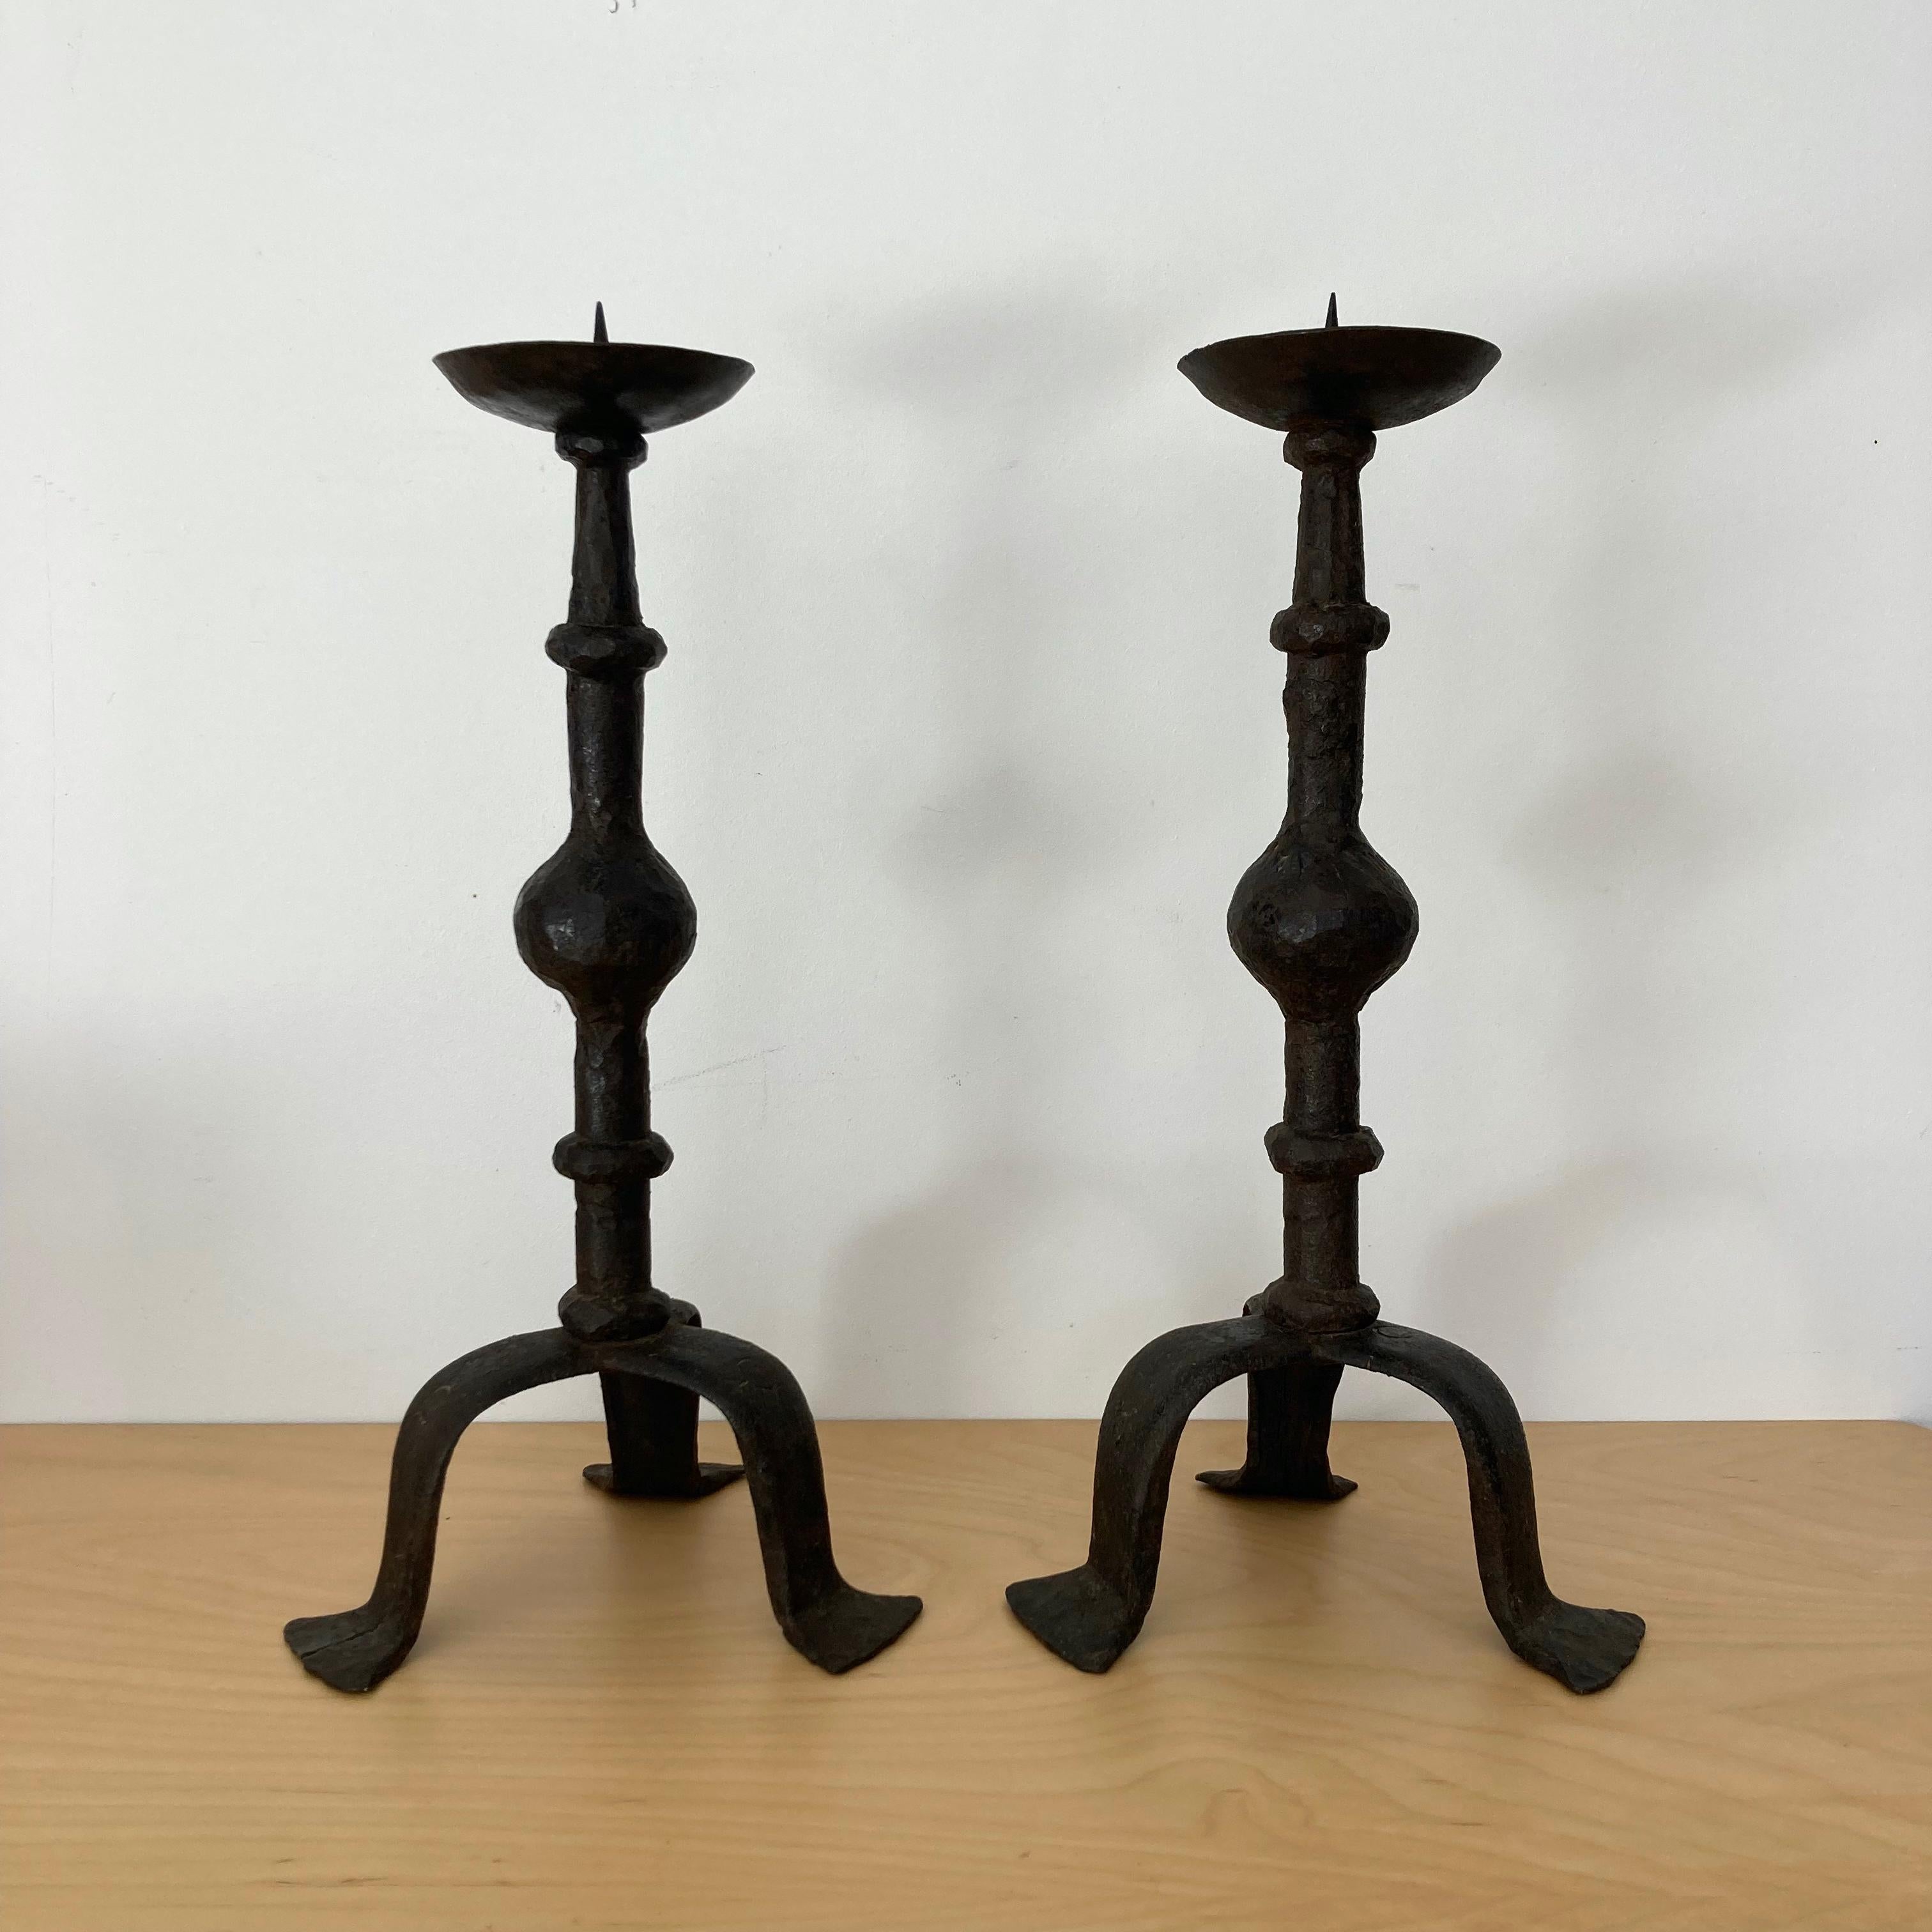 Mid-20th Century Forged Hammered Iron Candlesticks in the Style of Giacometti, France, 1950s